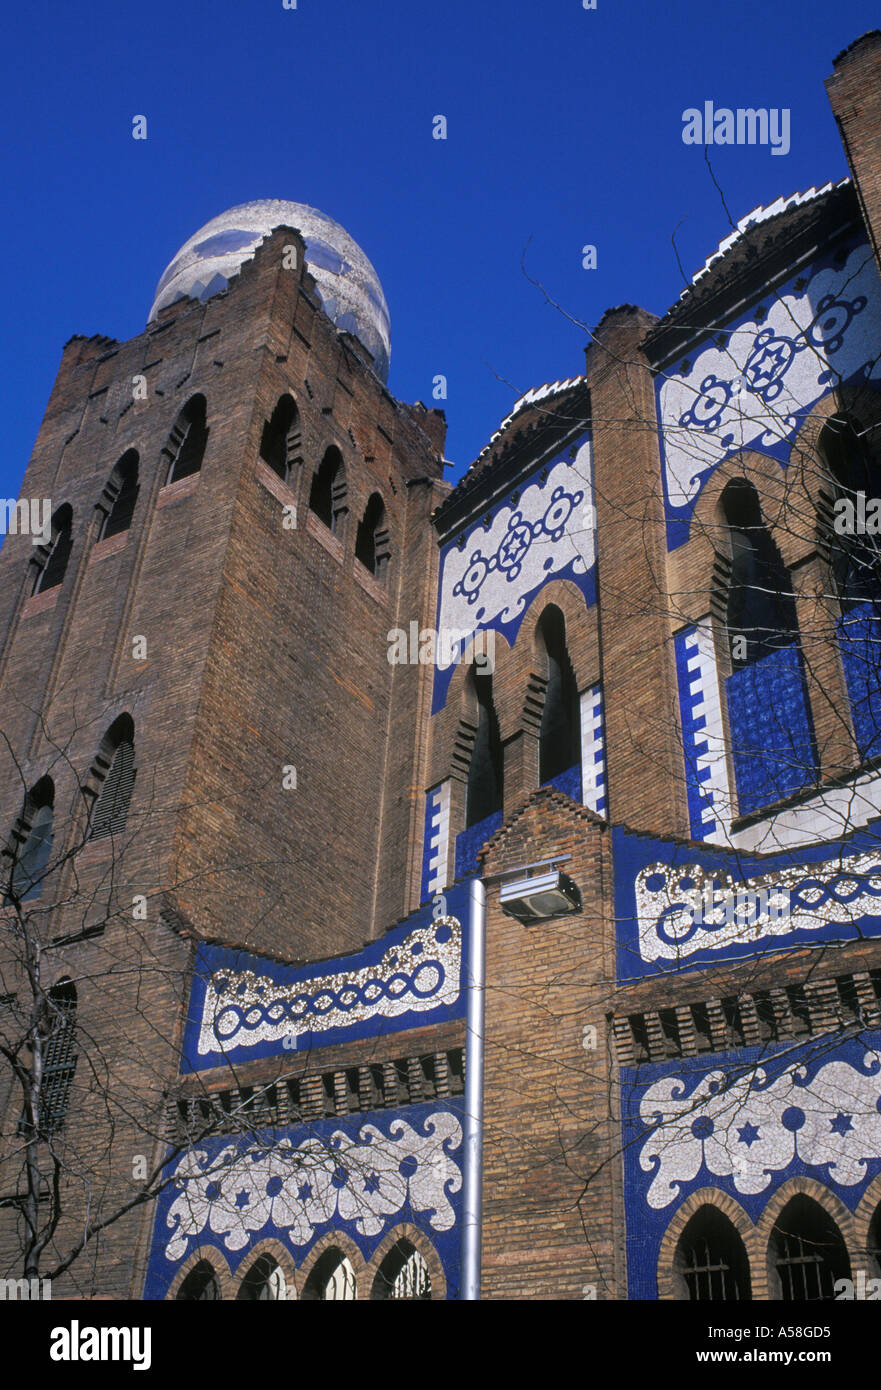 Bull Ring Plaza de Toros Placa Monumental dels Braus Barcelona Spain detail of building brick with blue and white mosaic Stock Photo